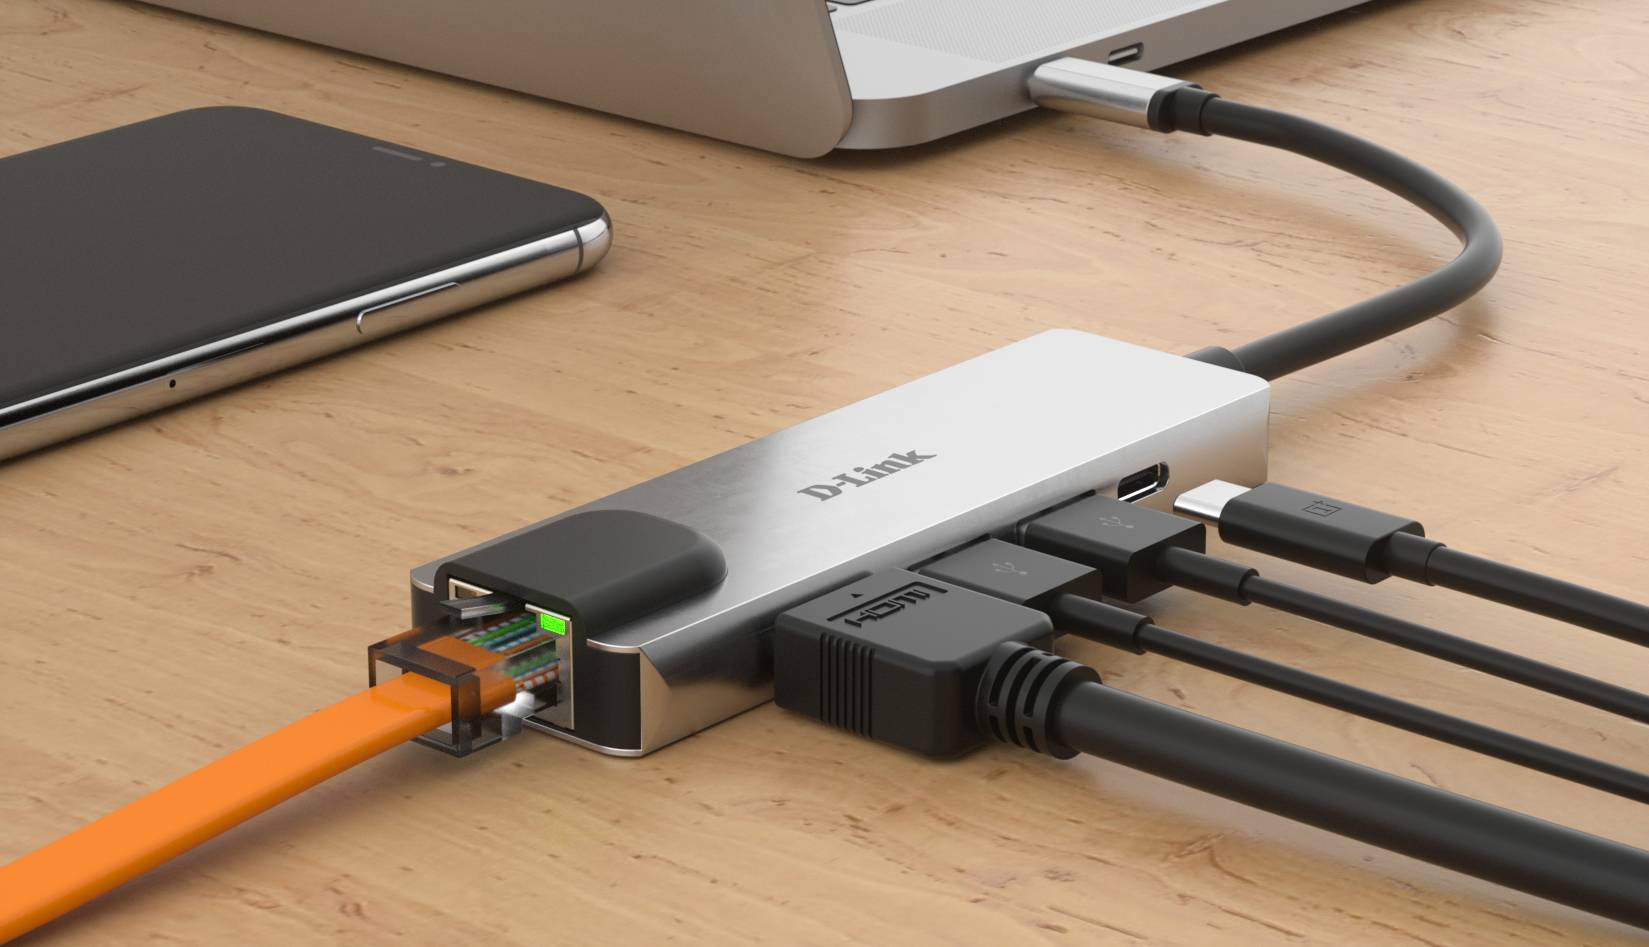 Rca Informatique - image du produit : 5-IN-1 USB-C HUB WITH HDMI ETHERNET AND POWER DELIVERY